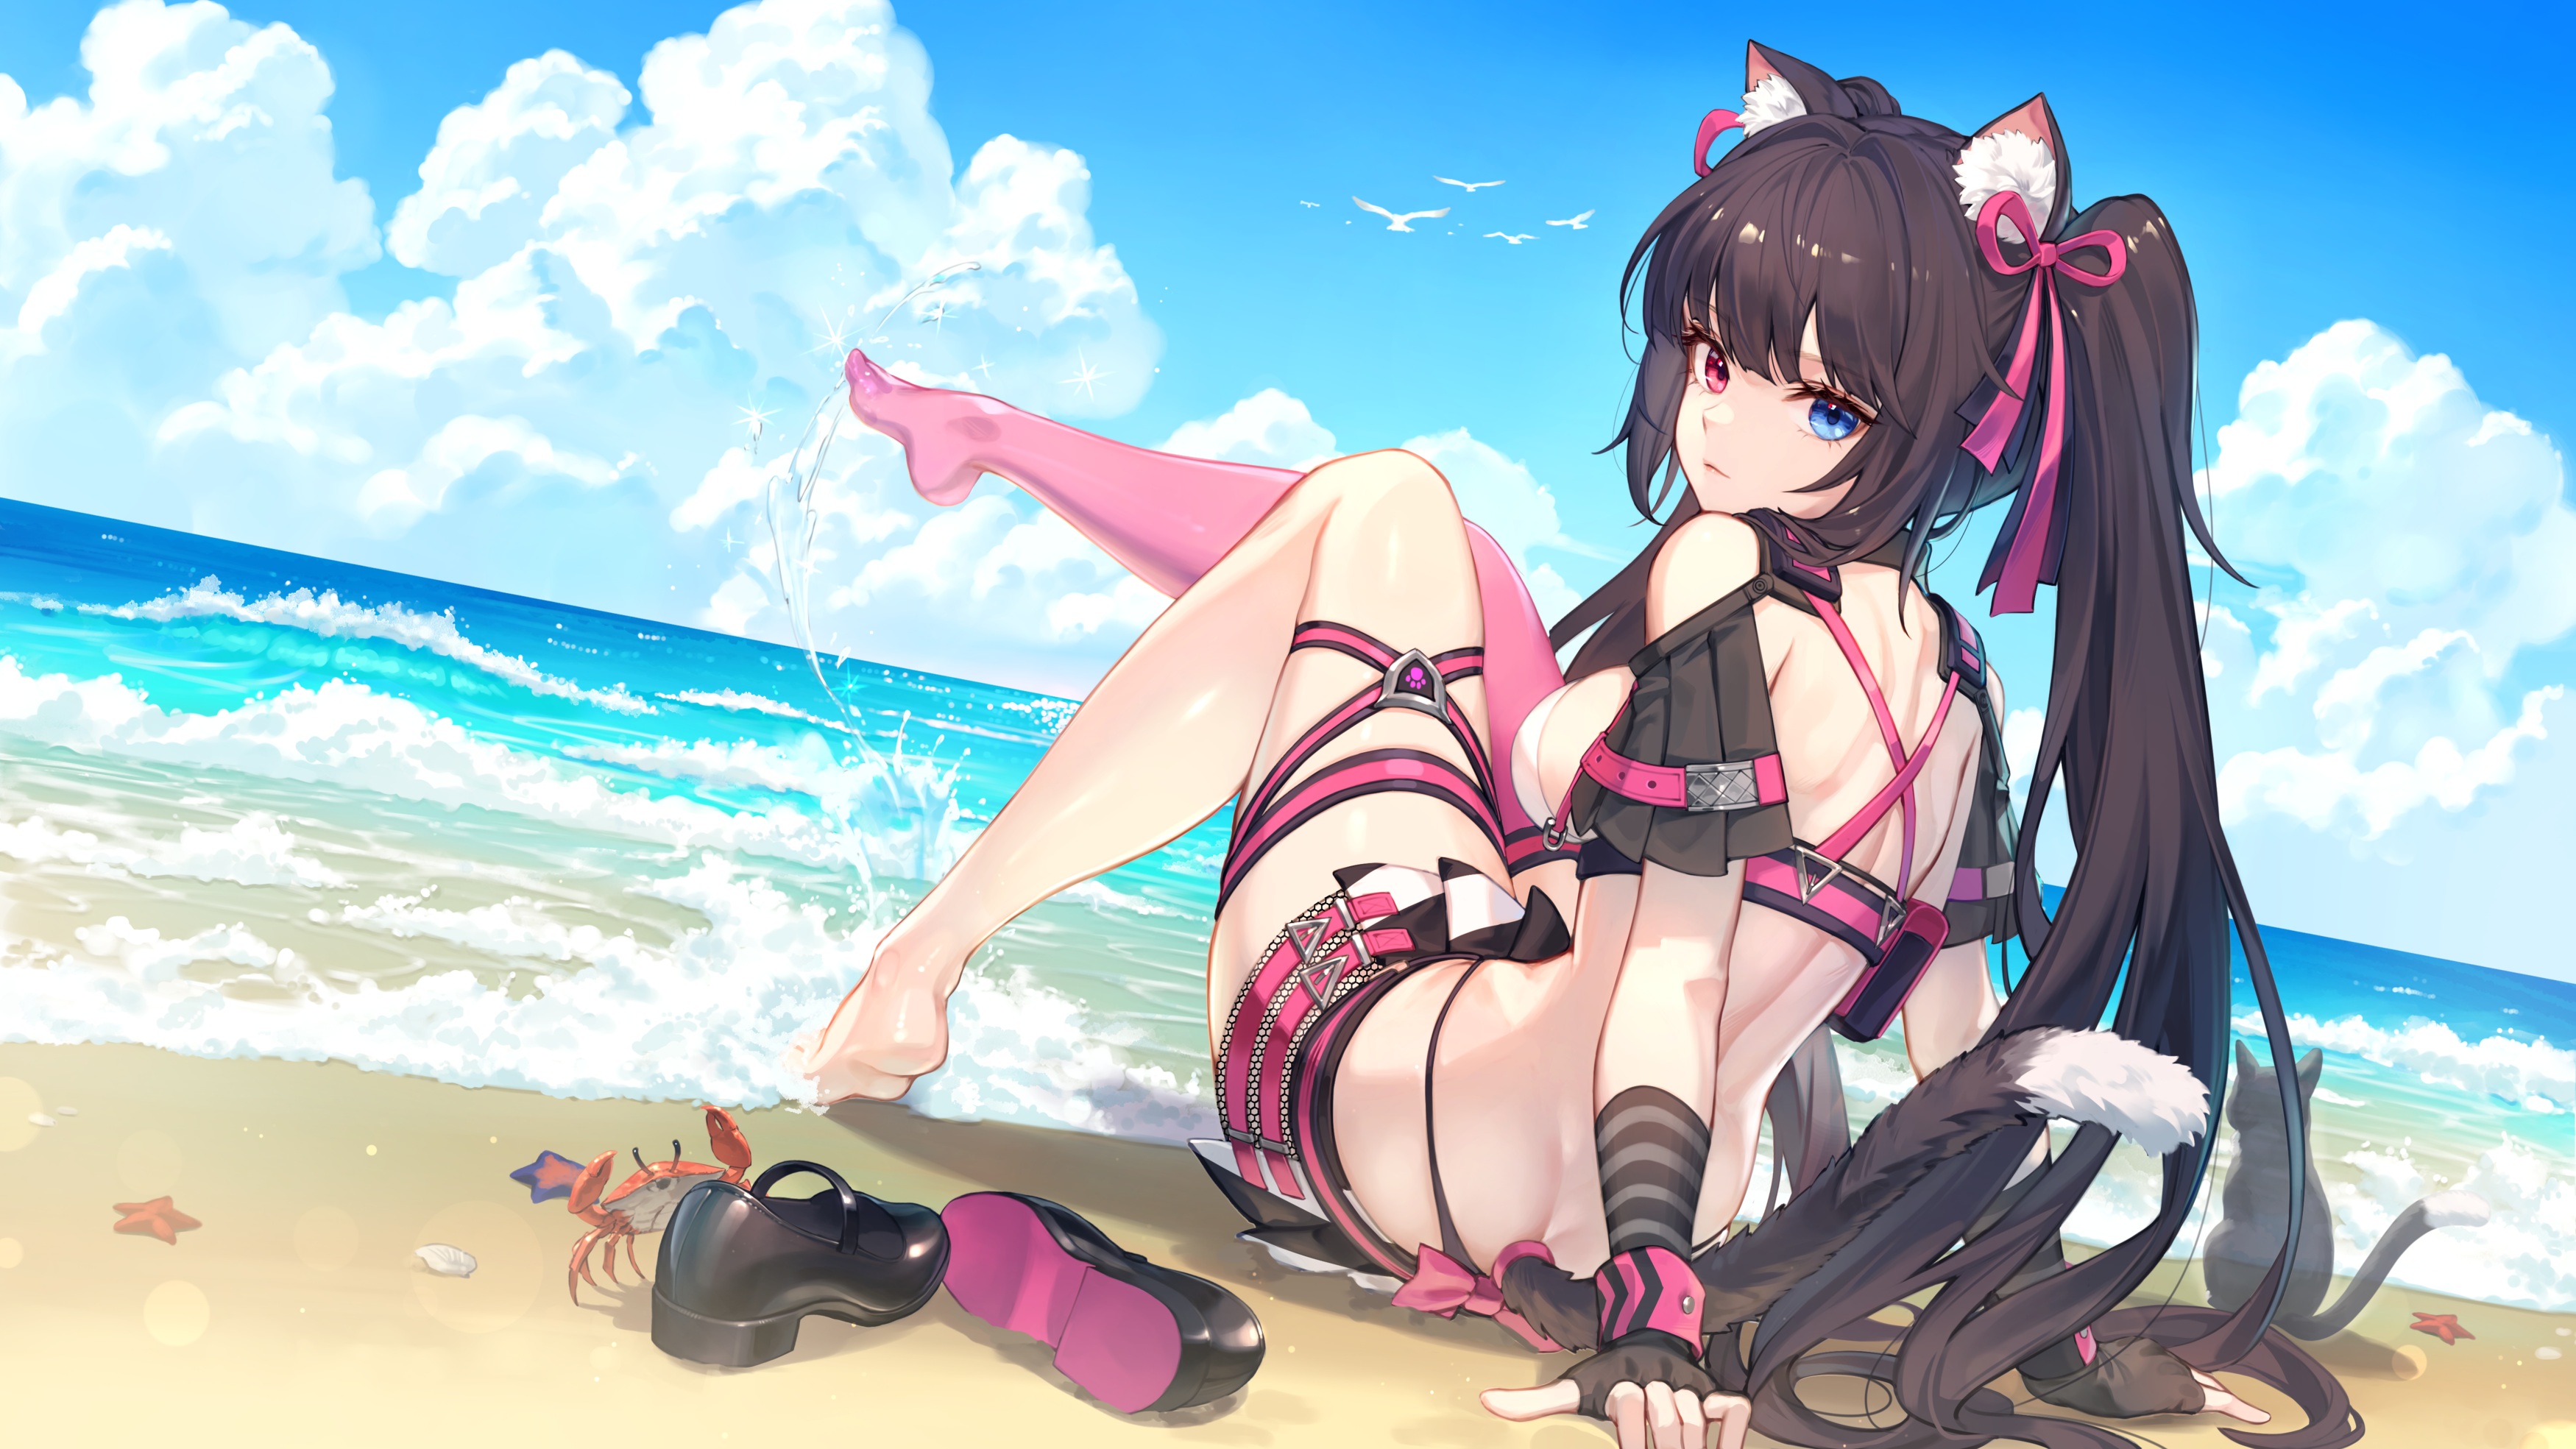 Anime 3500x1969 anime anime girls heterochromia cat girl cat ears cat tail feet water waves sky clouds long hair twintails swimwear sideboob big boobs gloves fingerless gloves shoes starfish crabs cats animals sand beach looking at viewer Nikke: The Goddess of Victory